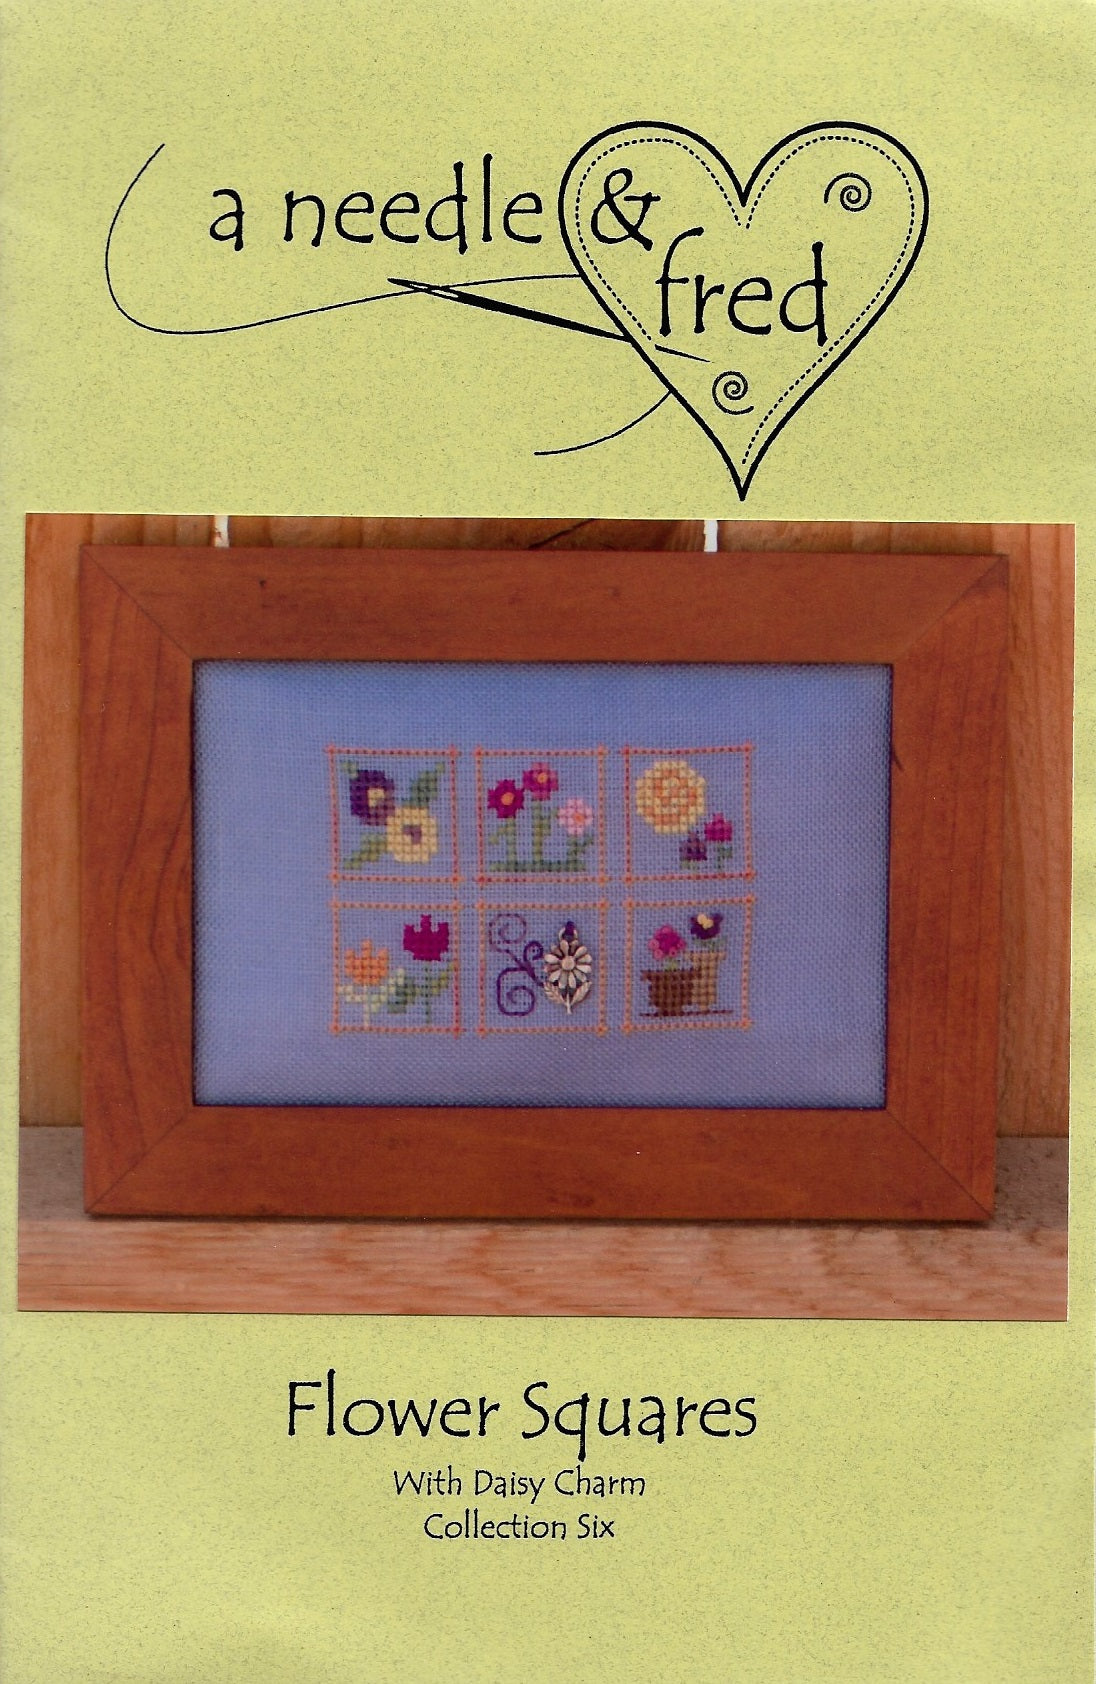 A Needle & Fred Flower Squares cross stitch pattern